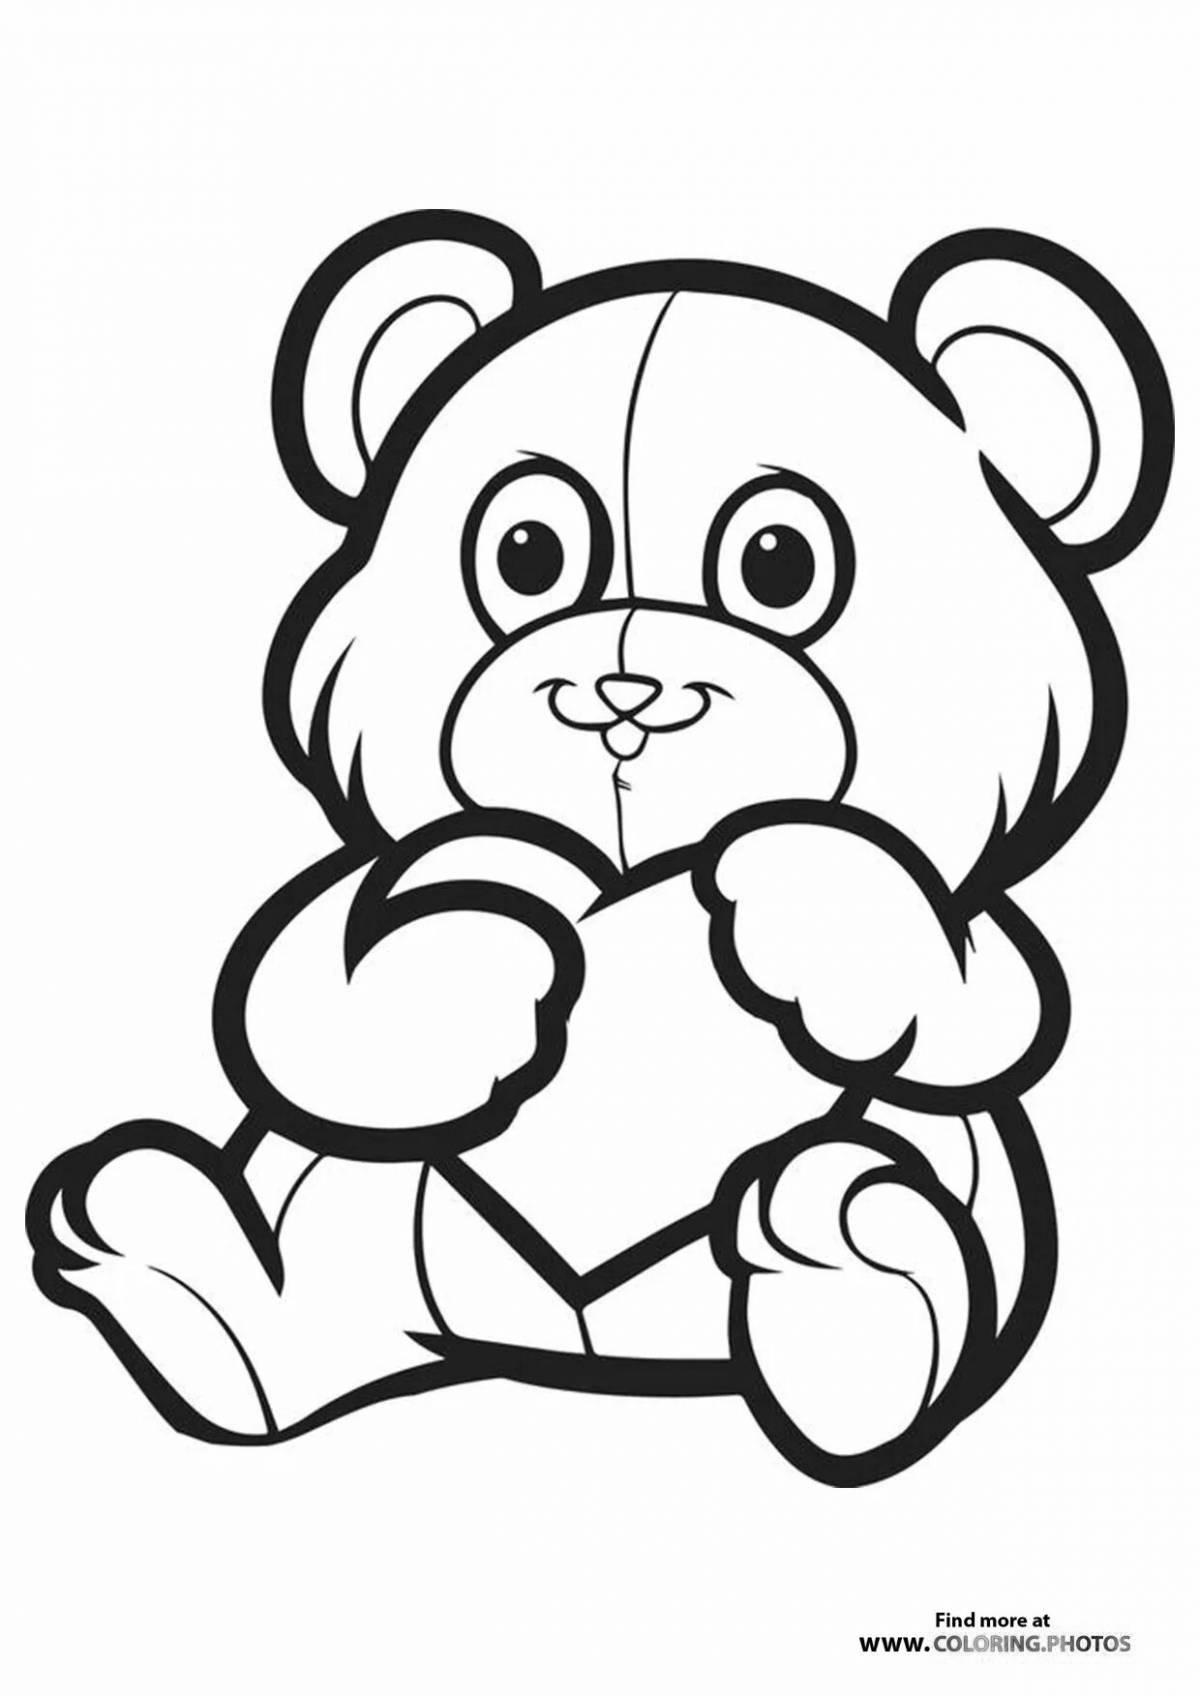 Bright coloring page